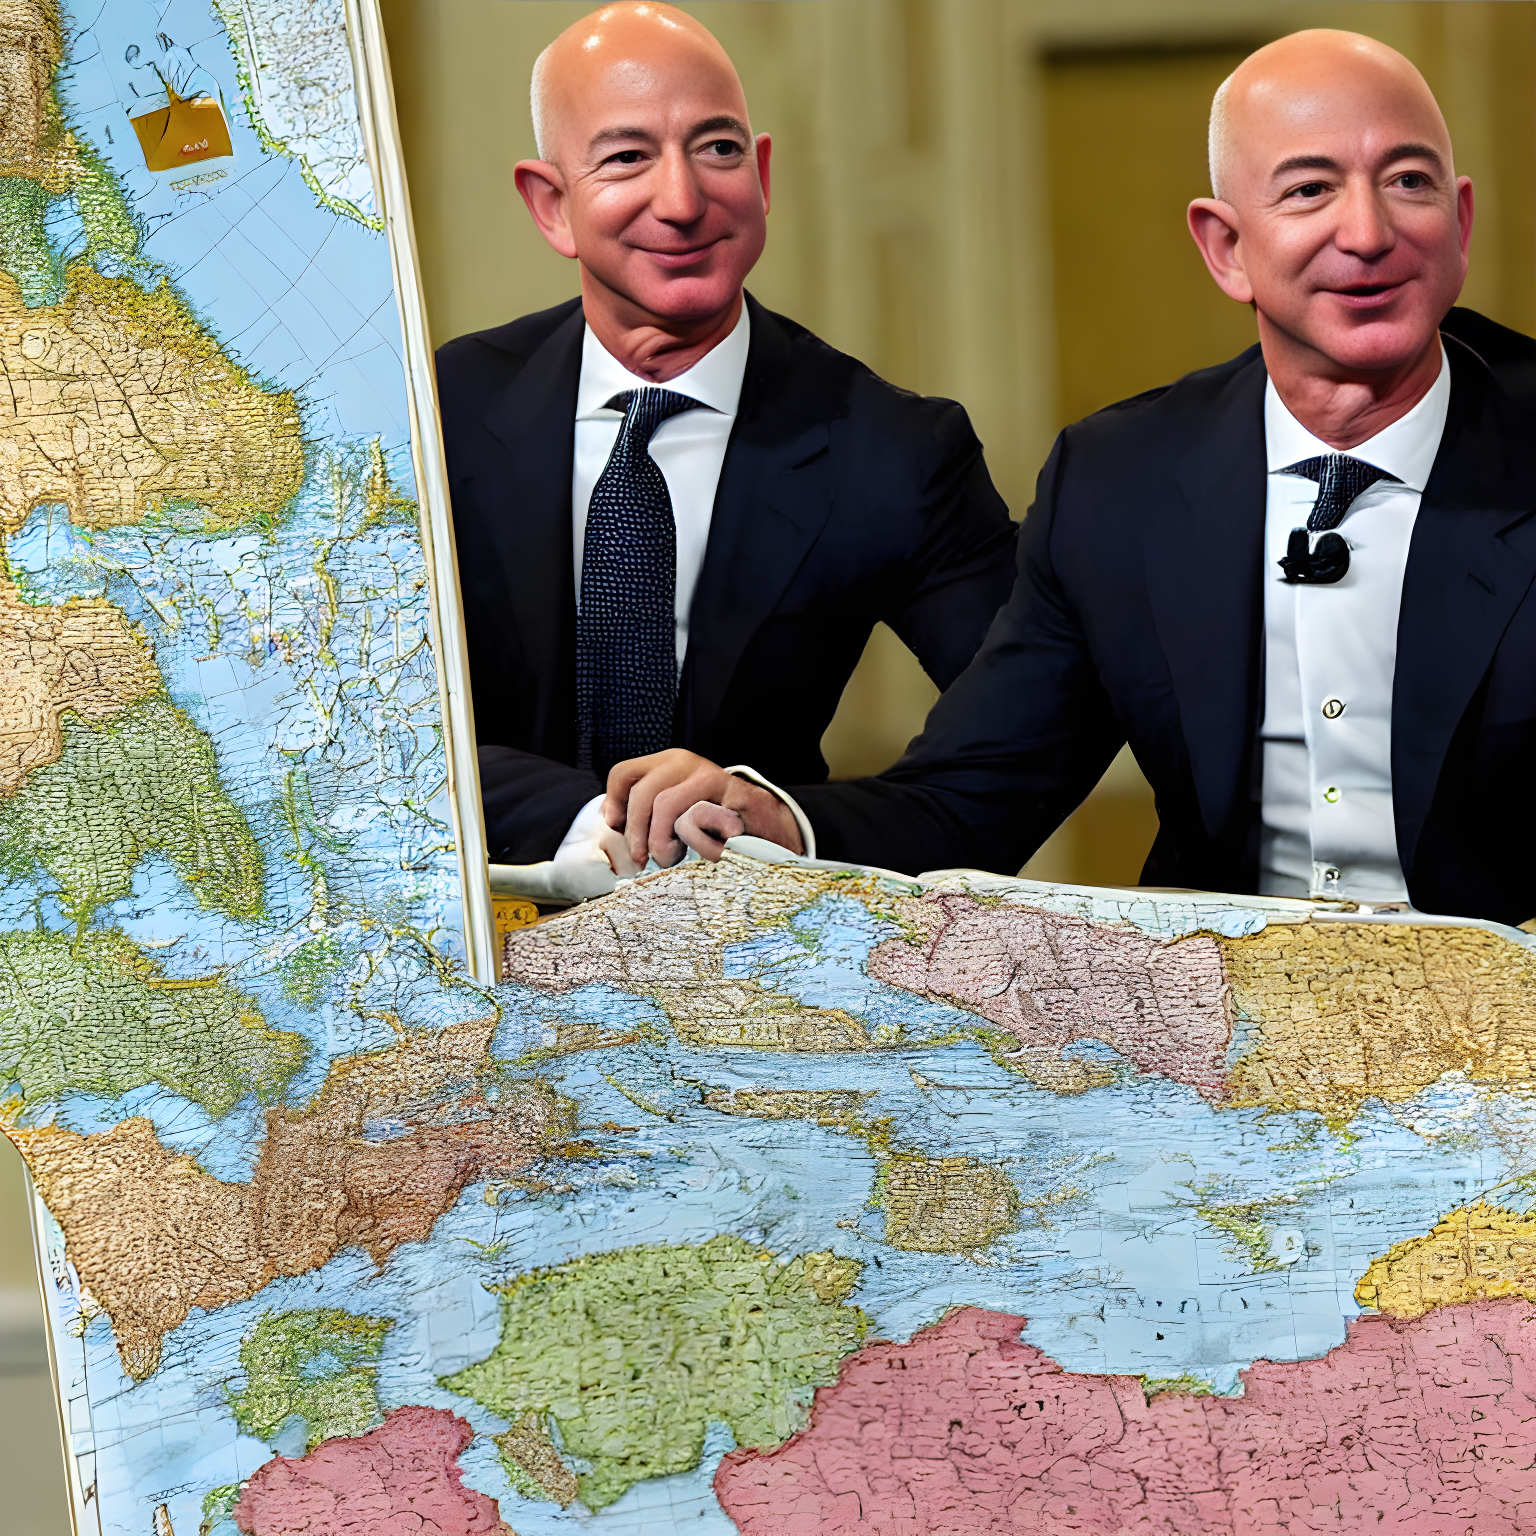 jeff bezos looking at the map of latin america and exclaiming about its potential